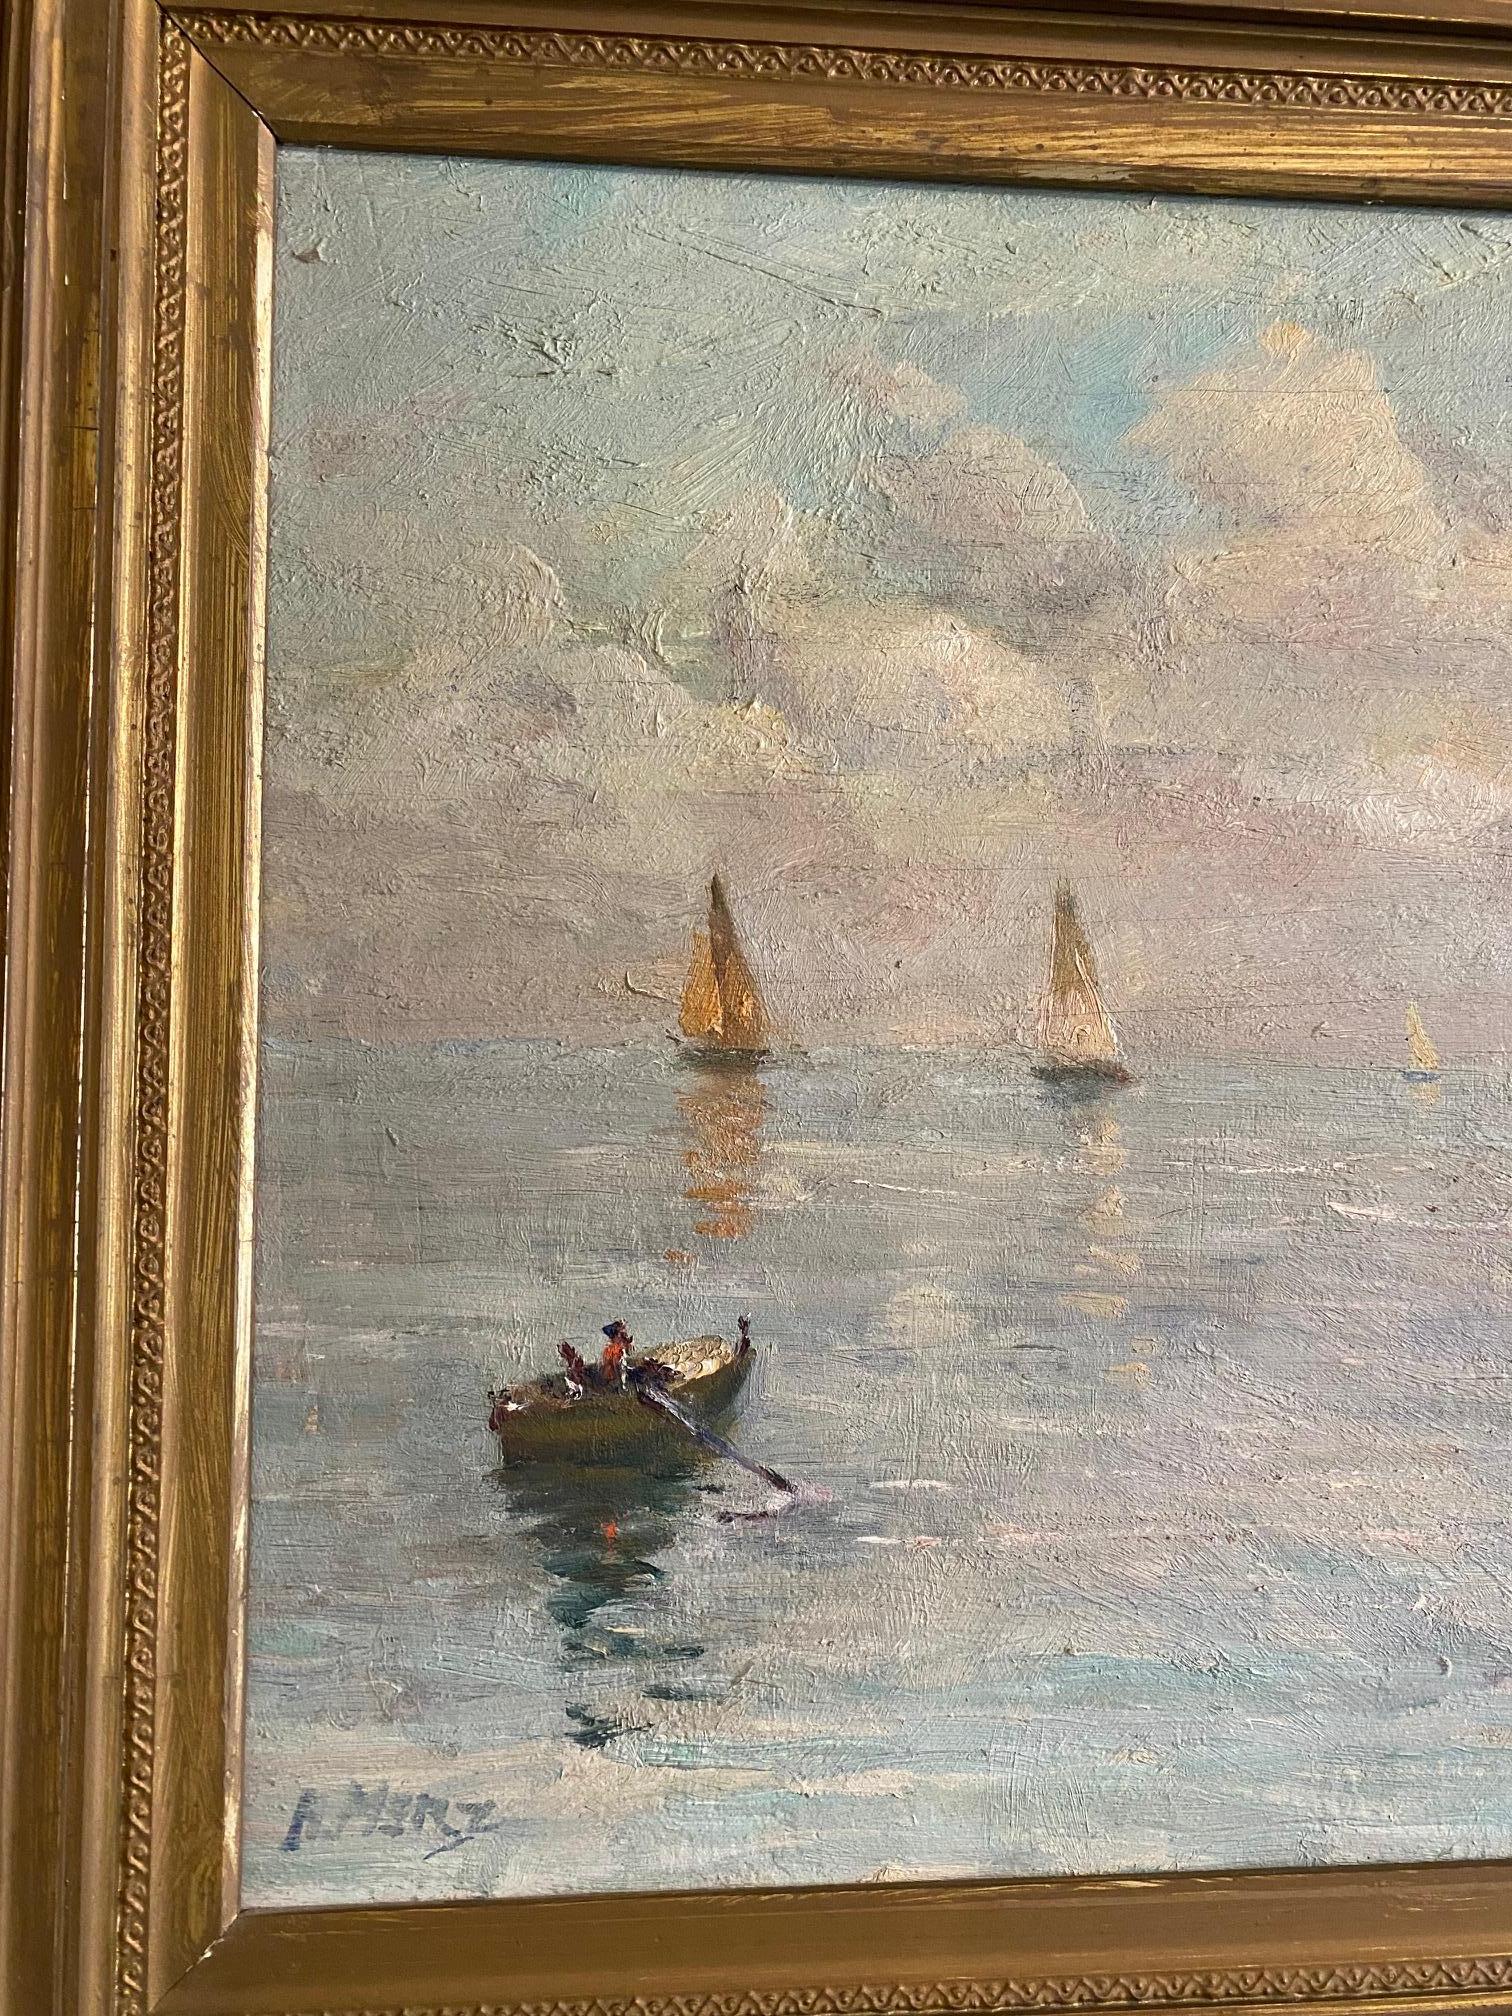 Antique Impressionist Seascape with a Schooner and Sloops on a calm sea, dory in the foreground, under an early morning cloudy sky, signed A. or H. Merz in the lower left, a period oil on canvas in it's original carved and gilded frame. A very